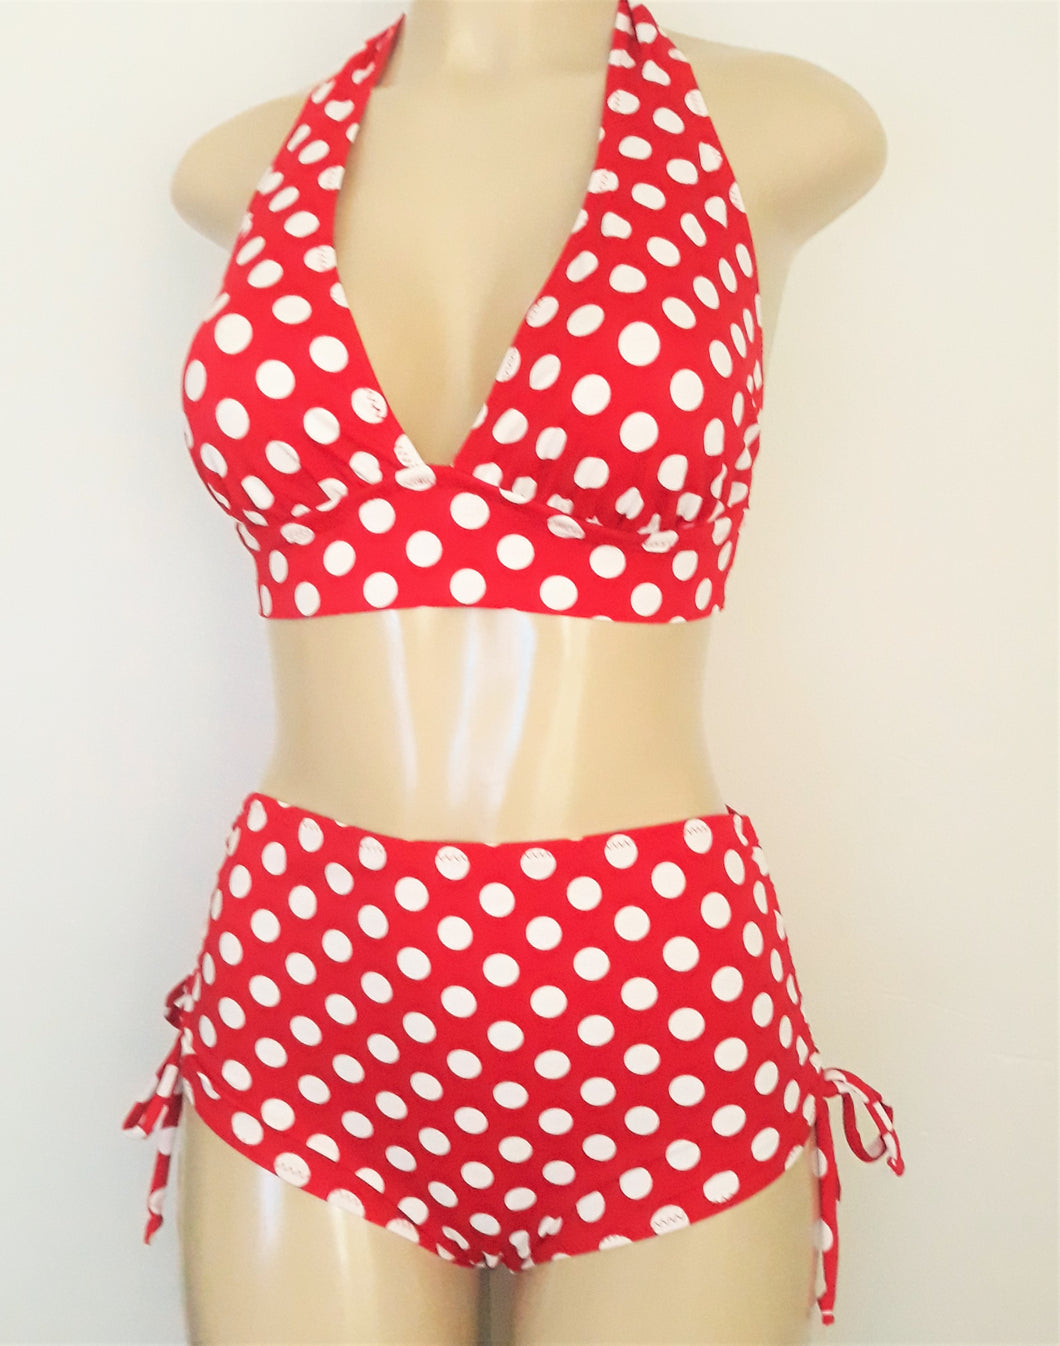 Retro pin up swimsuits